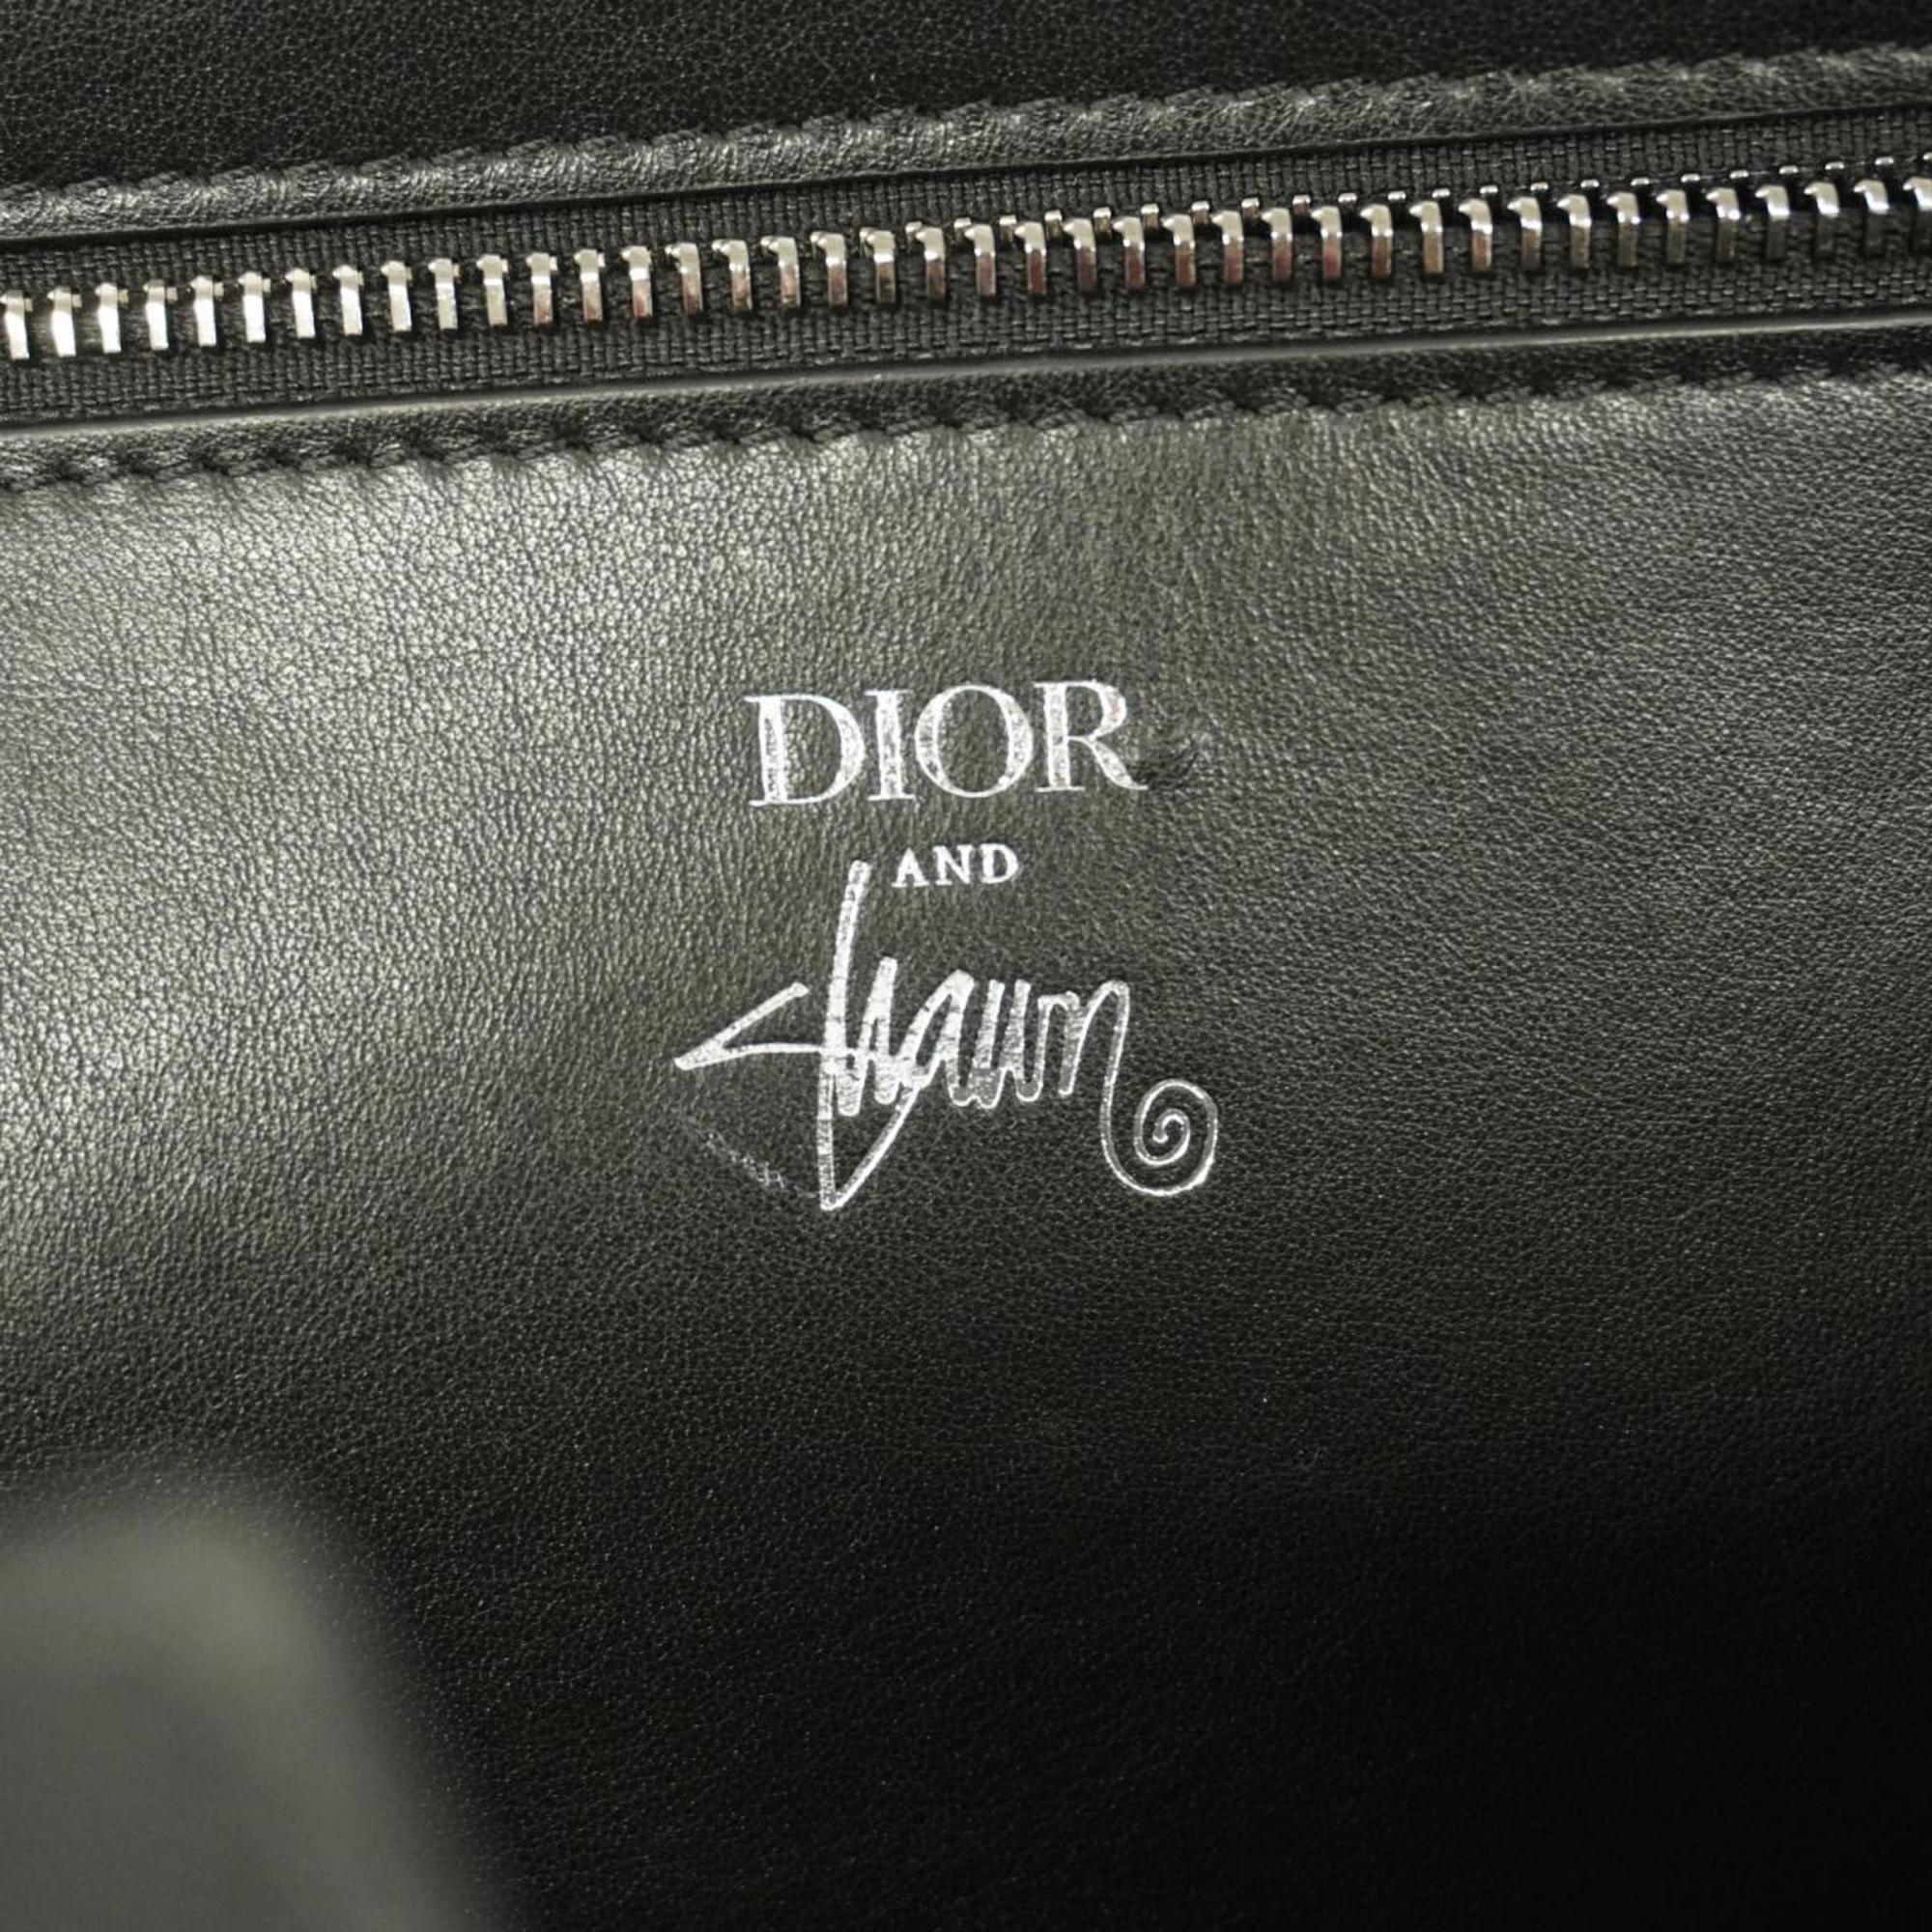 Christian Dior Tote Bag Shawn Stussy Leather Black Women's